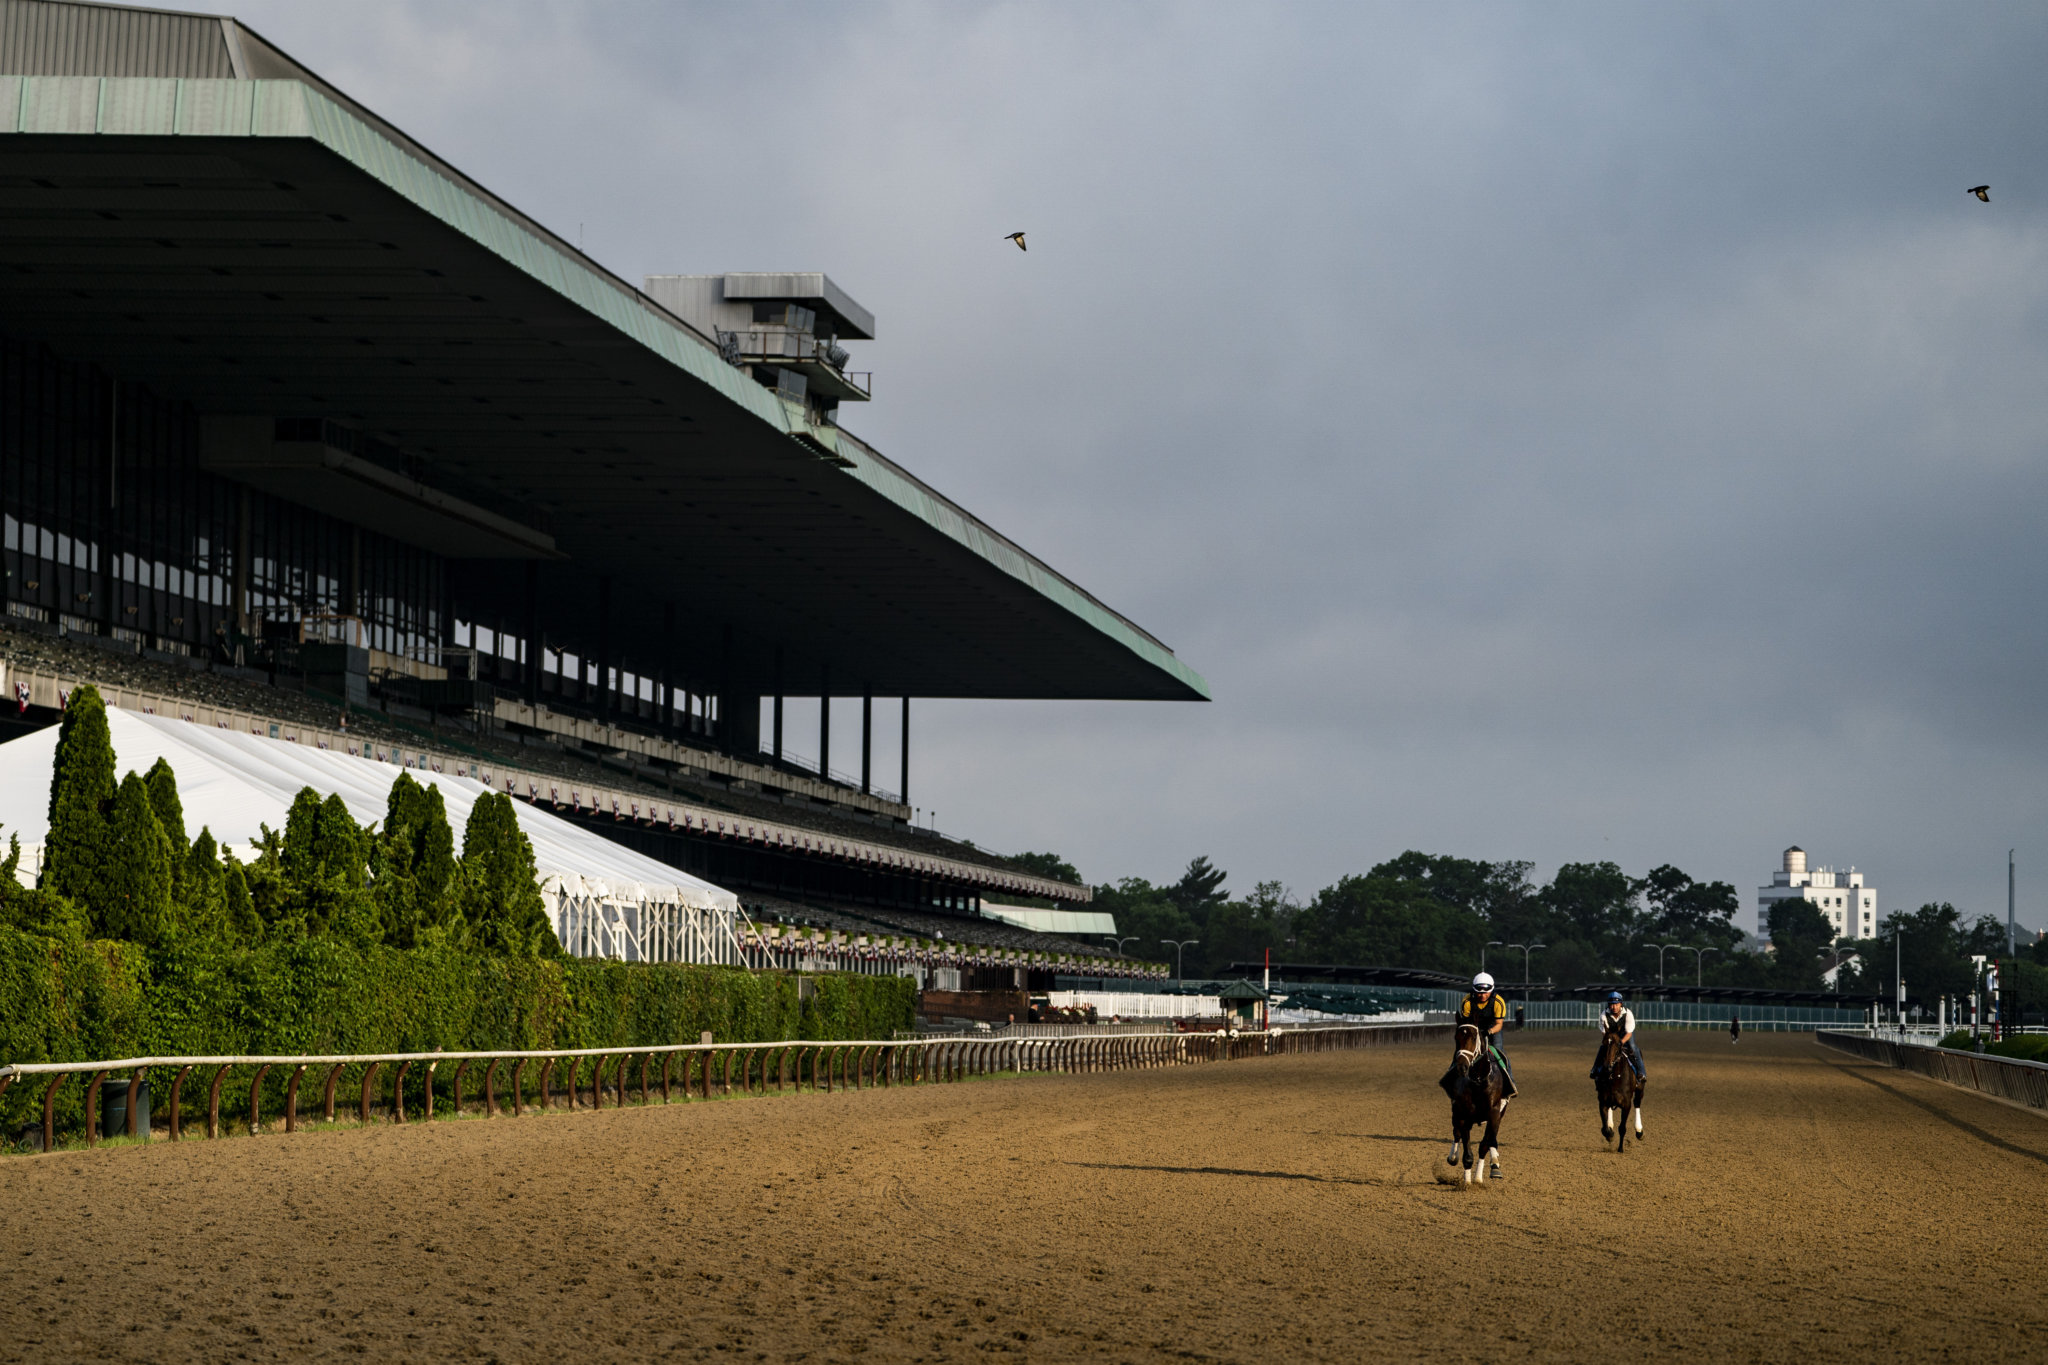 Nest looks to make Belmont Stakes history as fourth filly to win famed